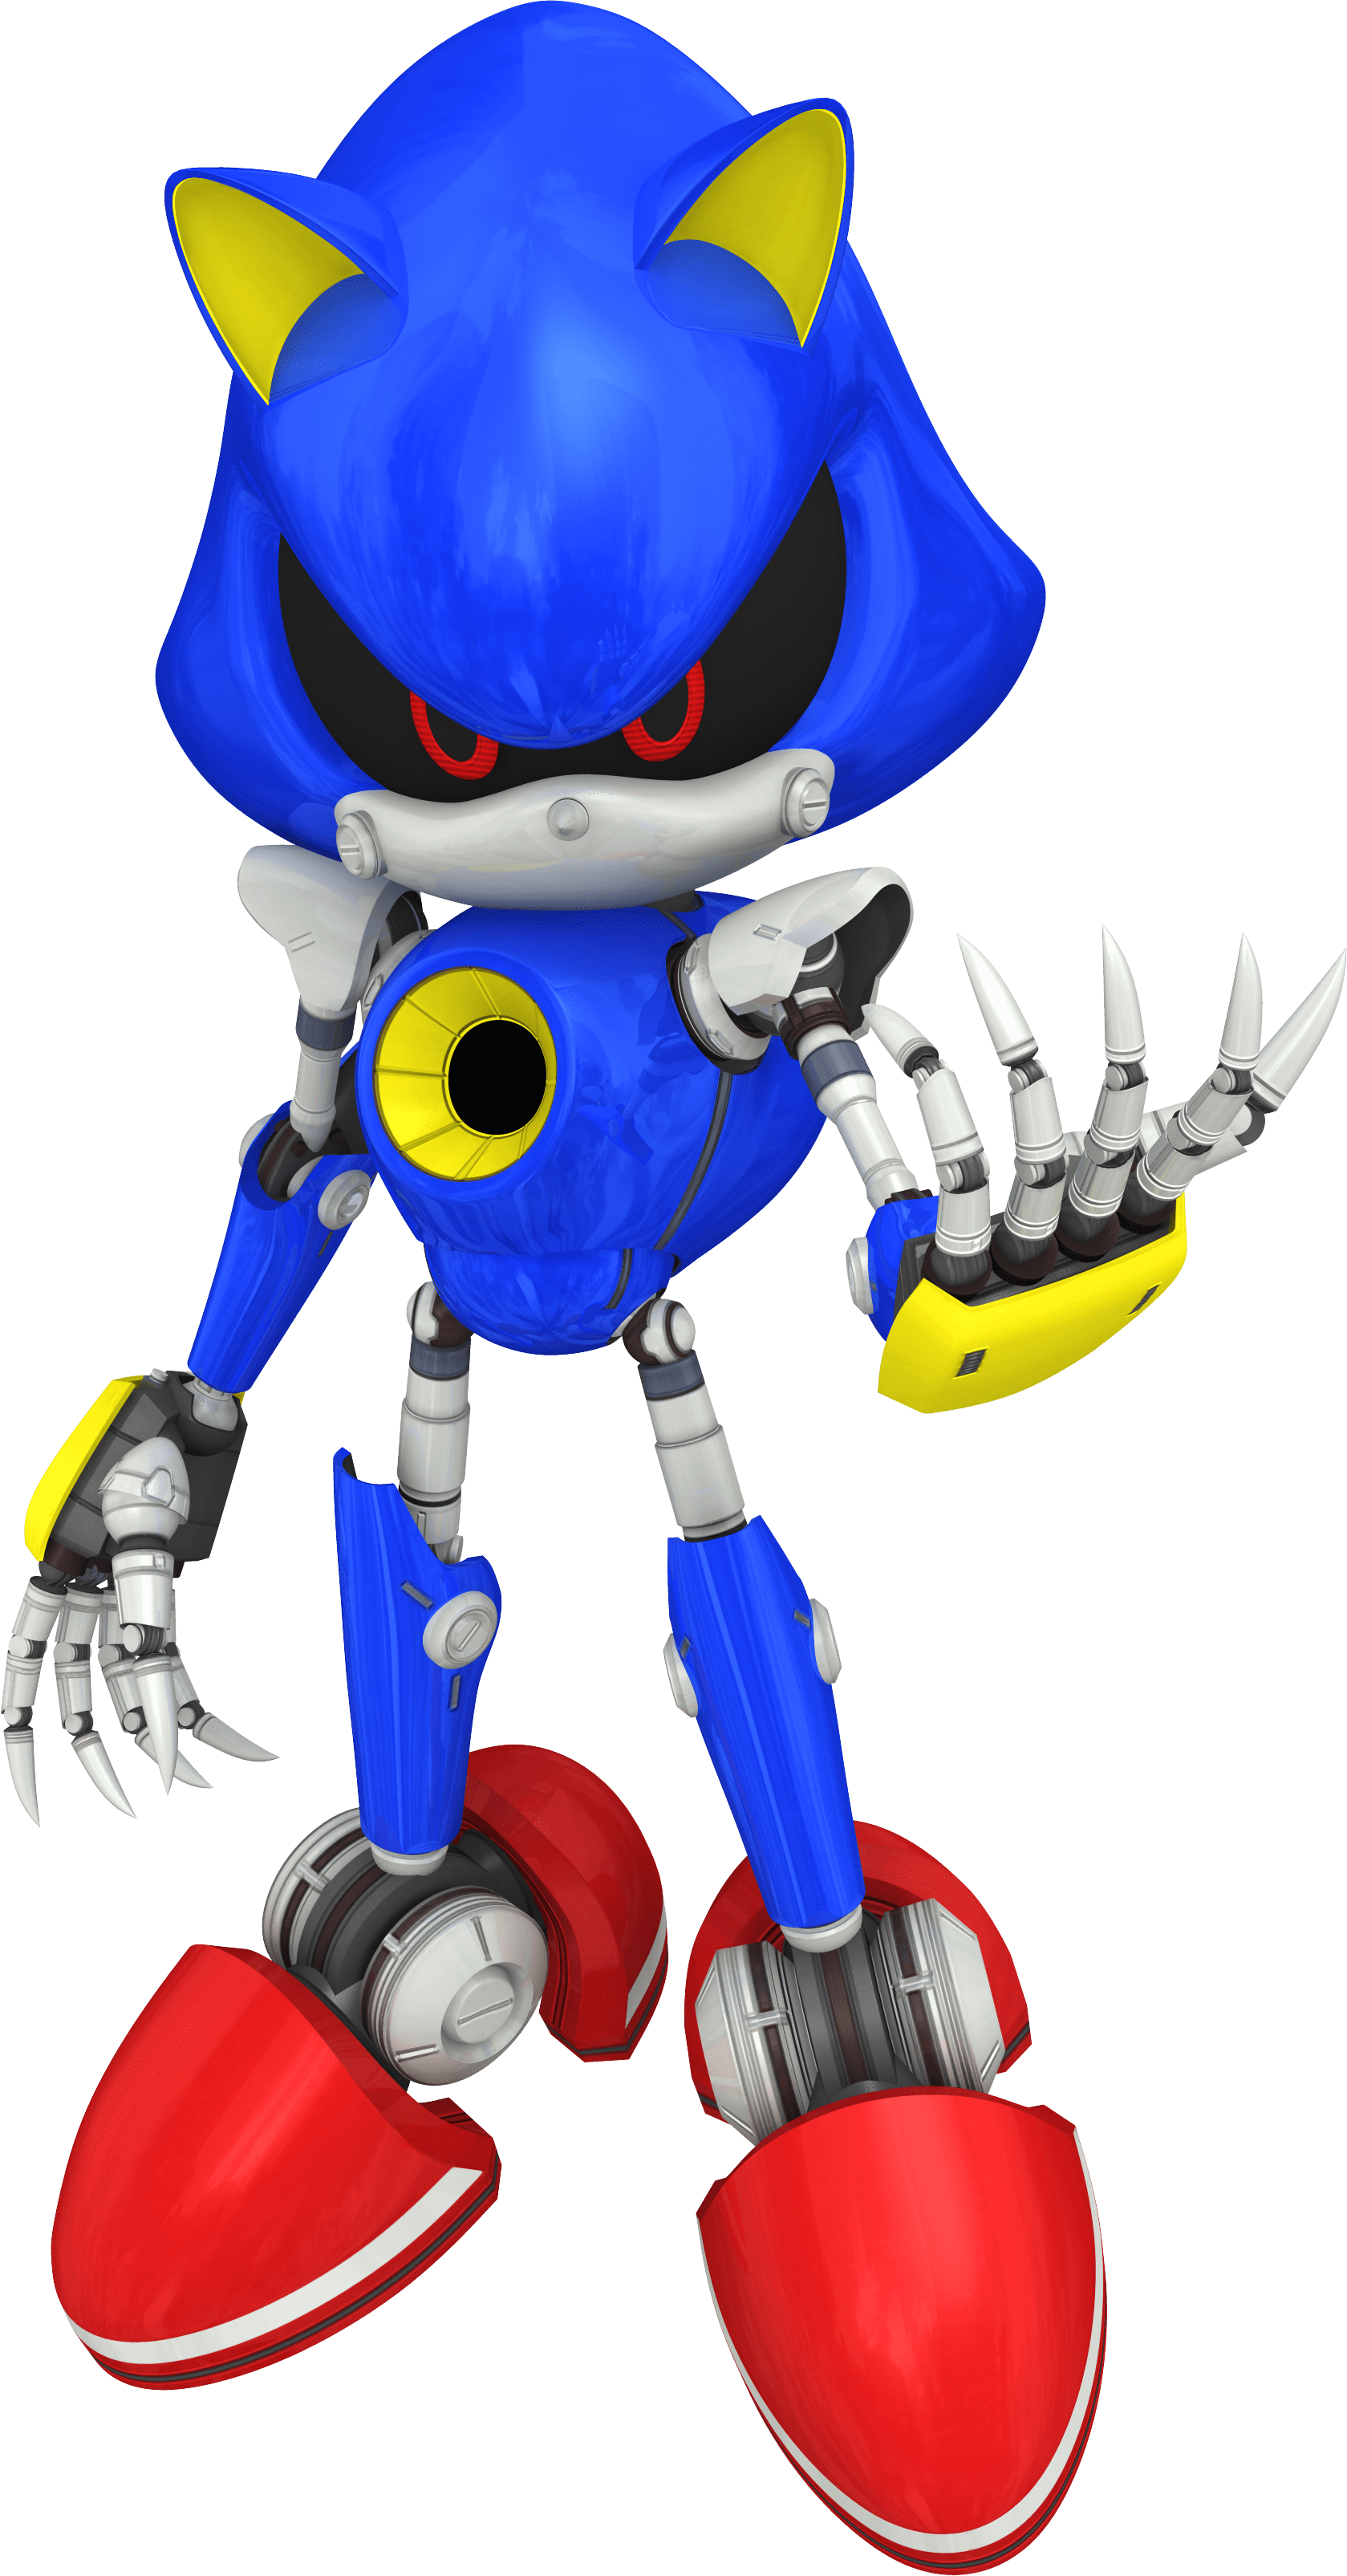 metal sonic charge attack